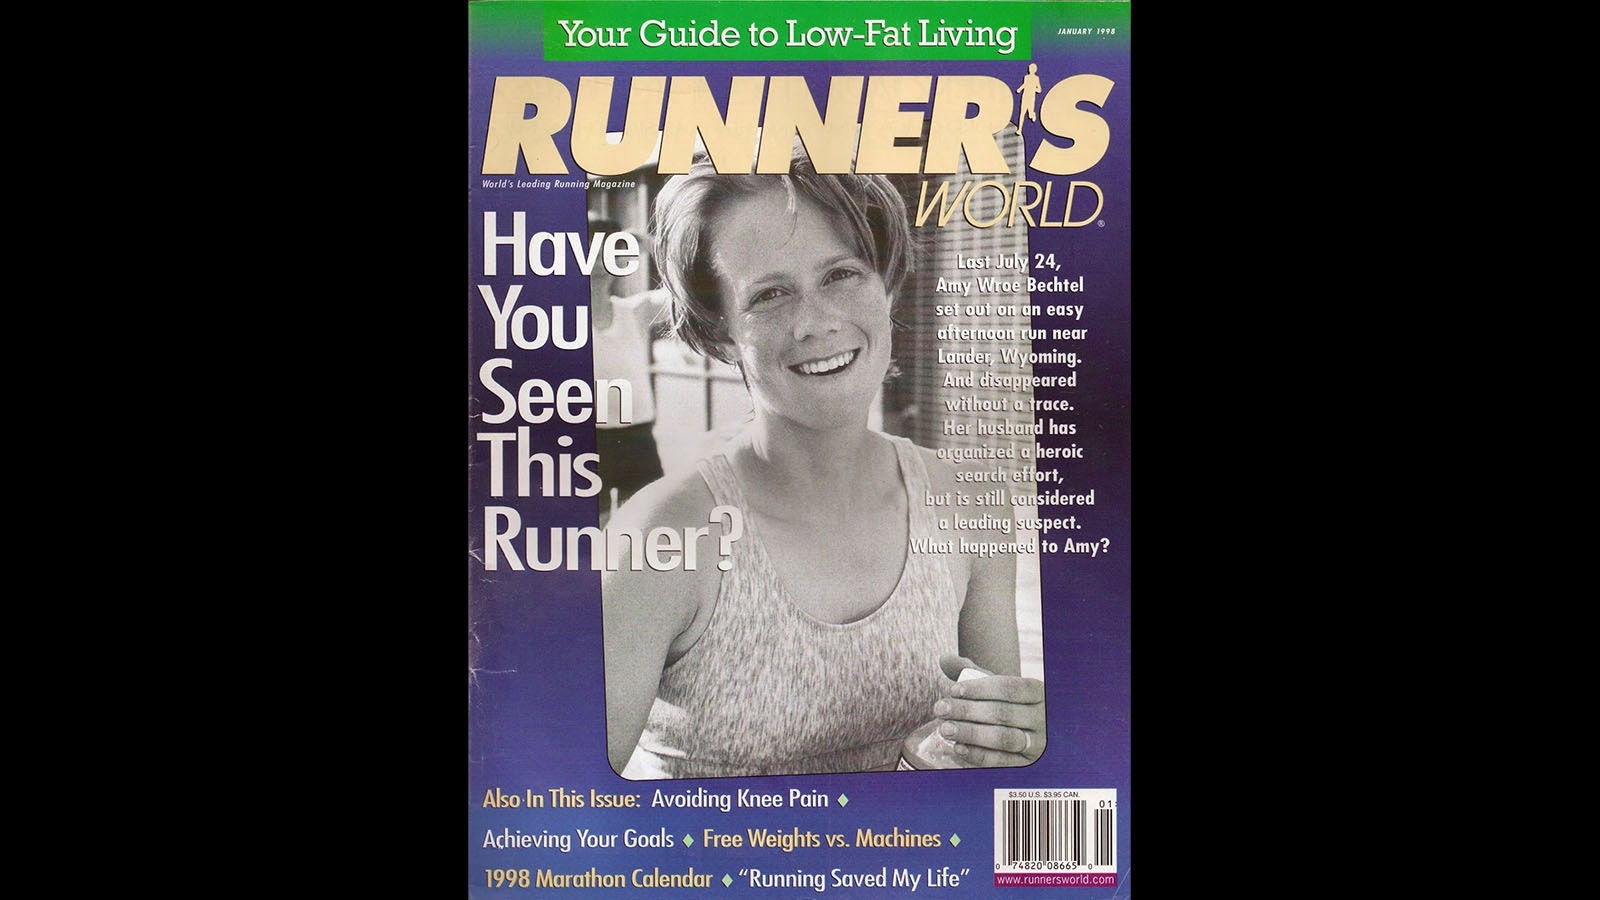 The Runners World featuring a story on Amy Wroe Bechtel is still the magazine's all-time highest selling issue.